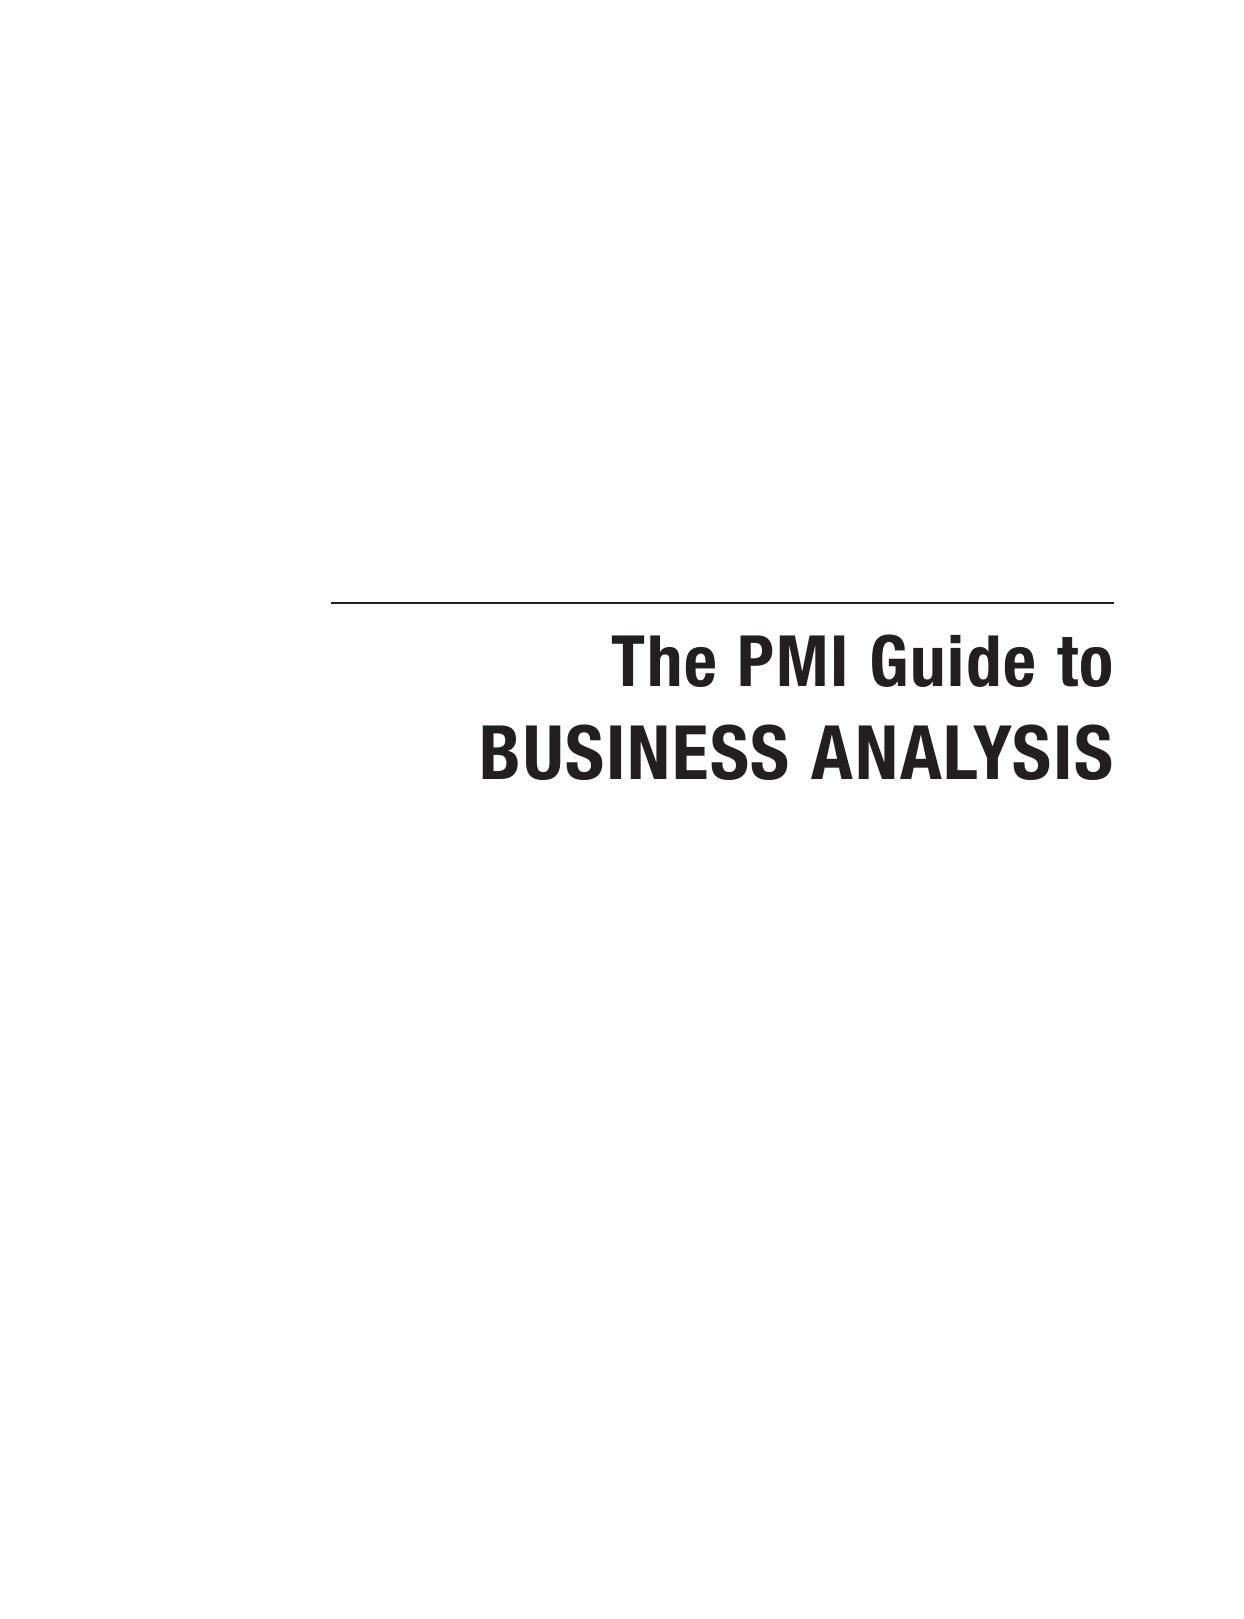 The PMI Guide to BUSINESS ANALYSIS 2017